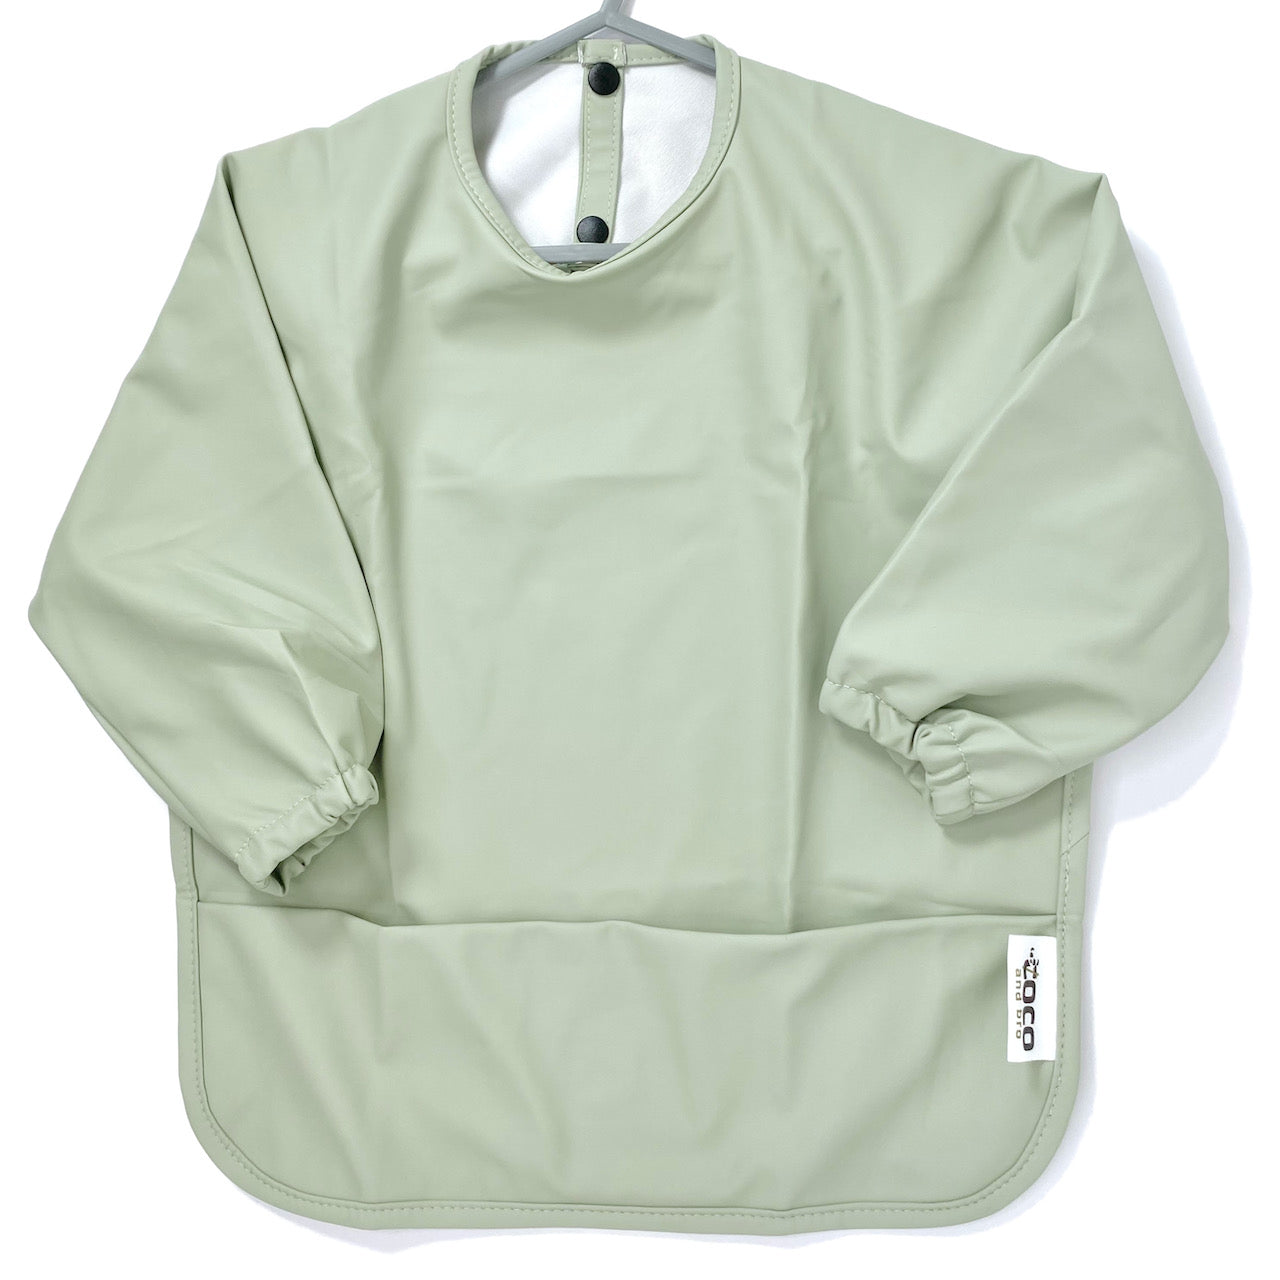 Long-sleeve kids apron in a pistachio green colour, showing front view.